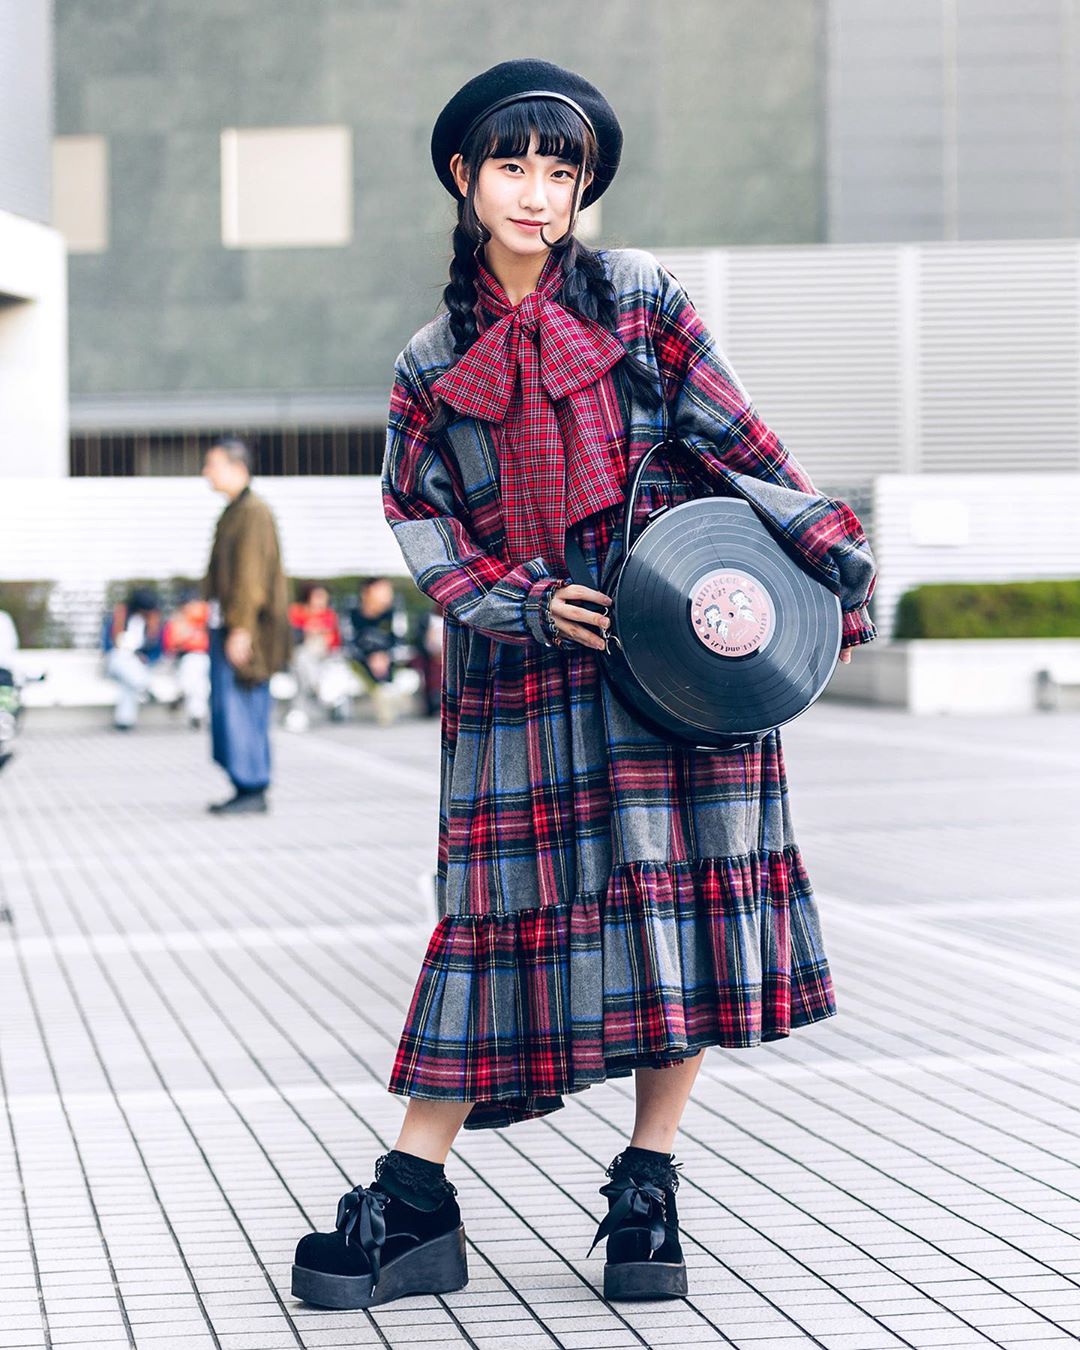 Tokyo Fashion: 17-year-old Heart on the street in Tokyo wearing a plaid